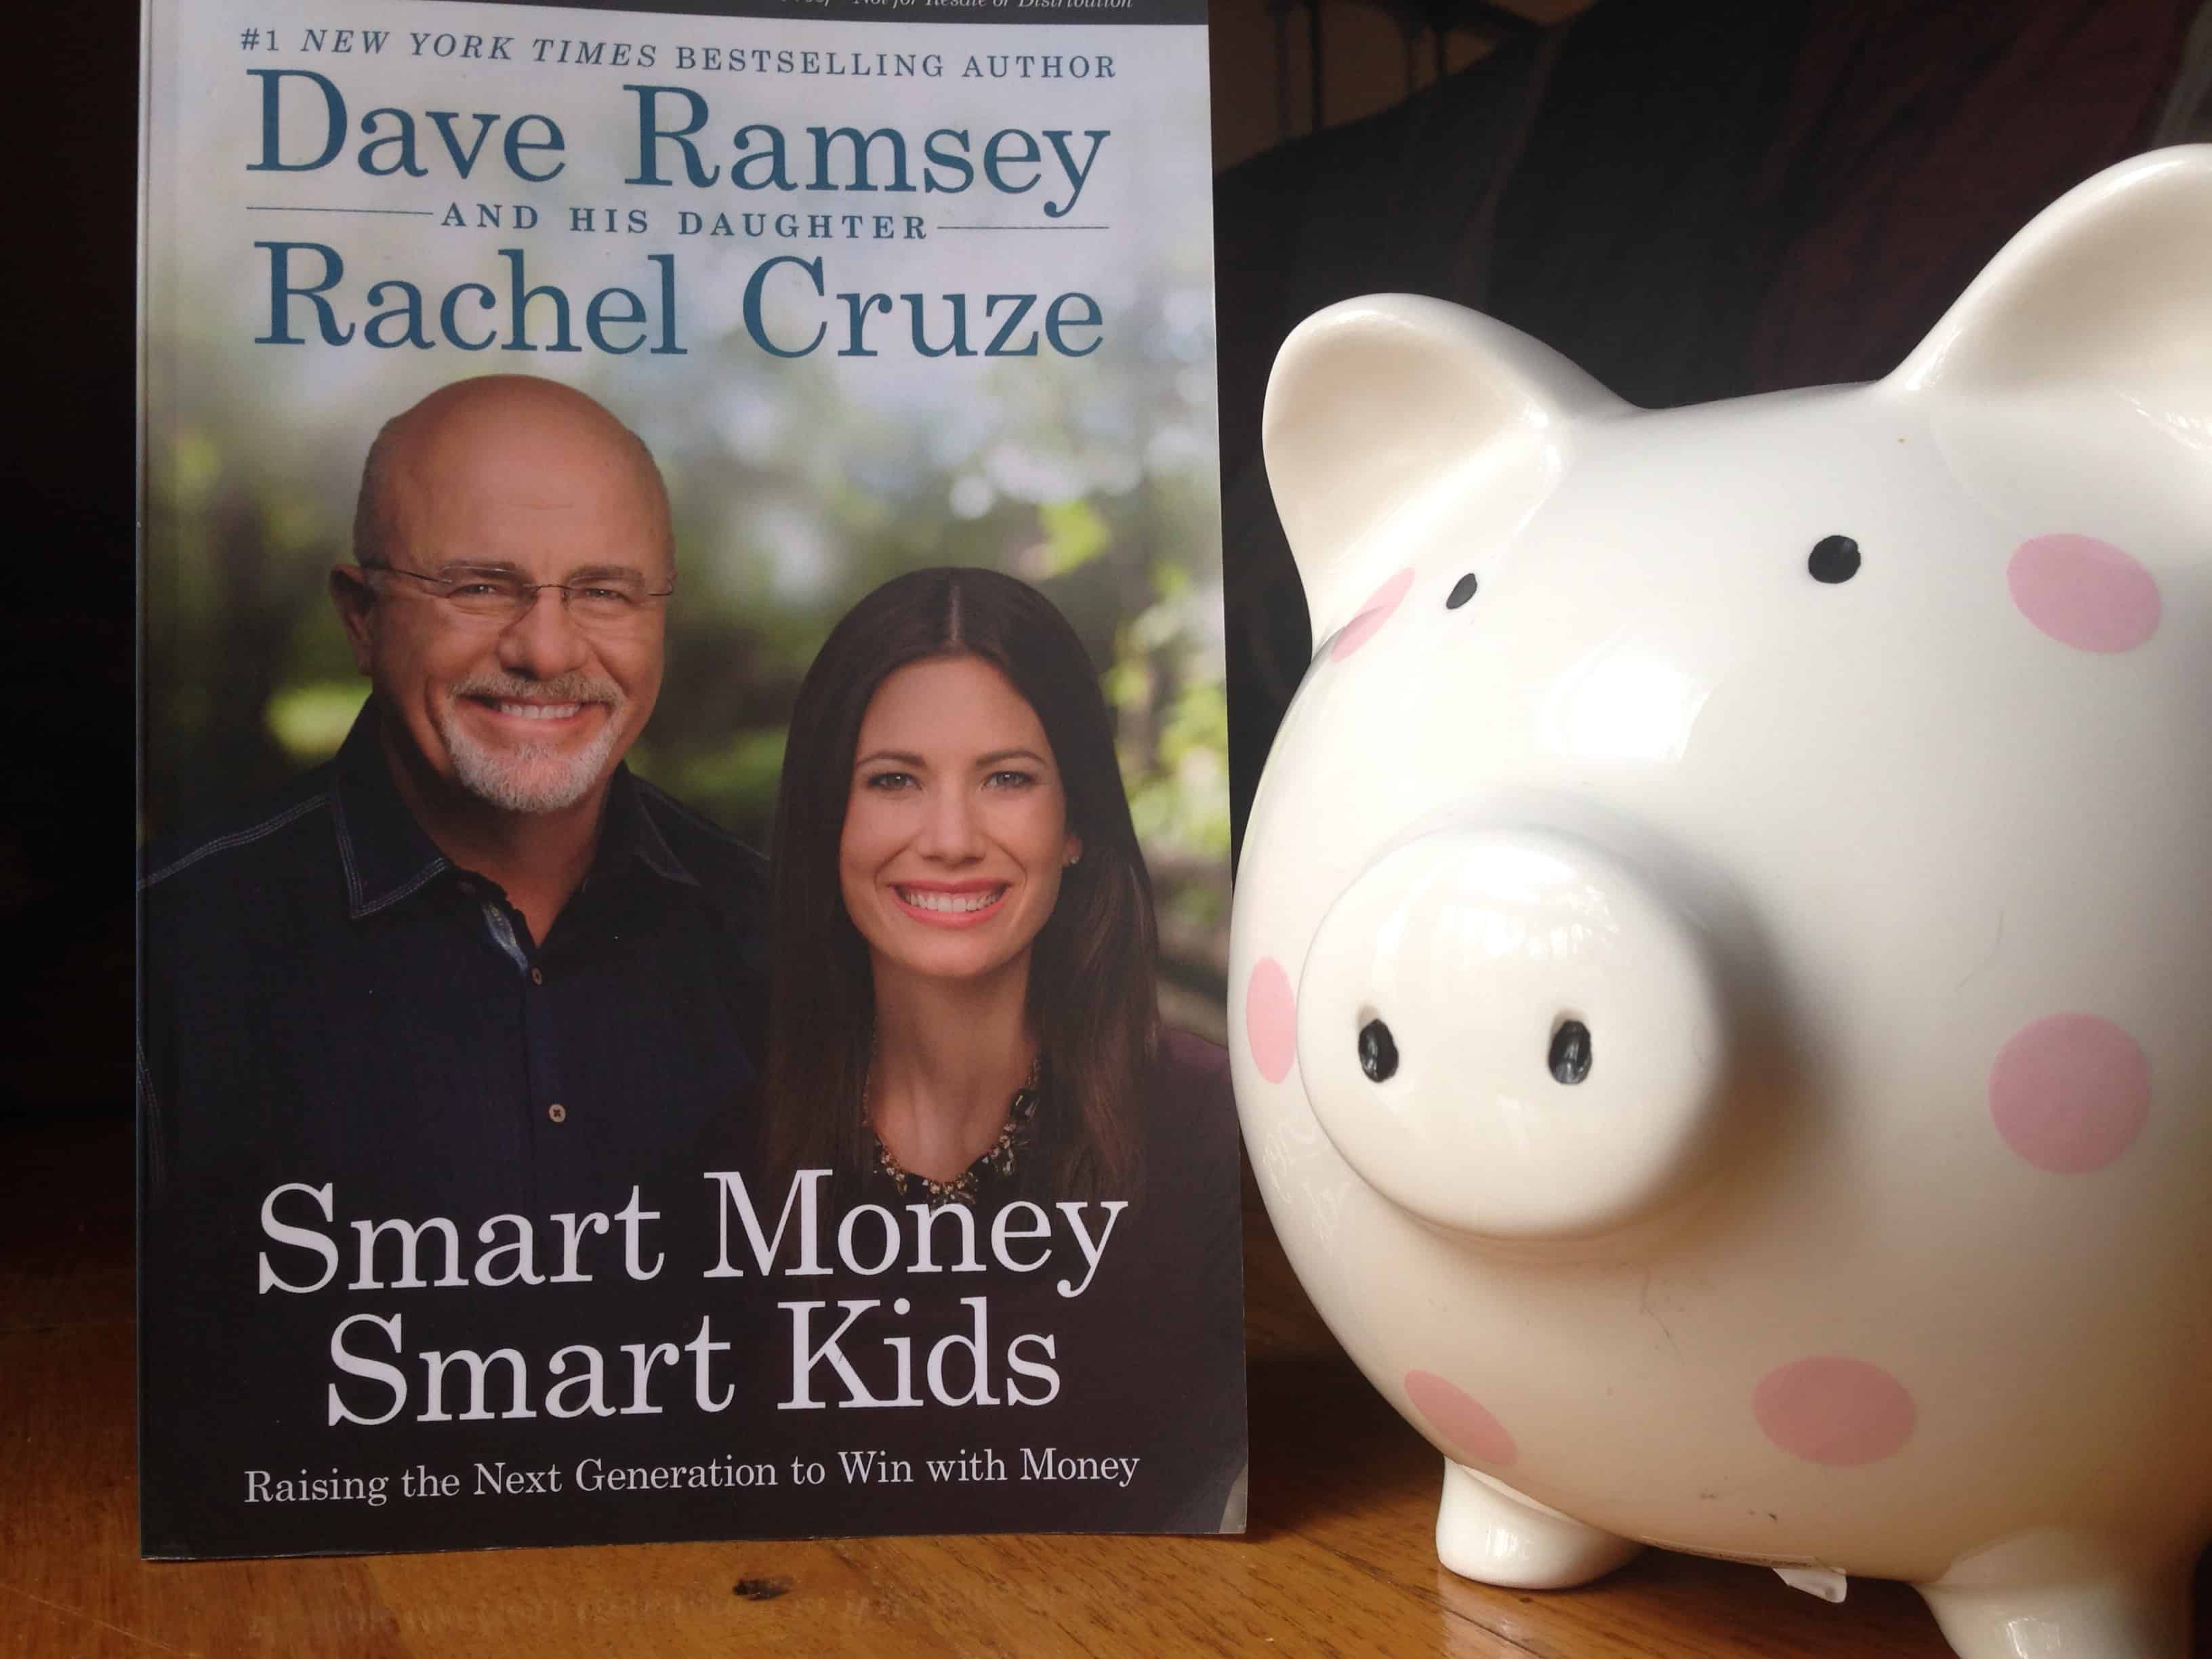 The NY Times Bestseller, Smart Money Smart Kids, has totally rocked the family's household financial routine.